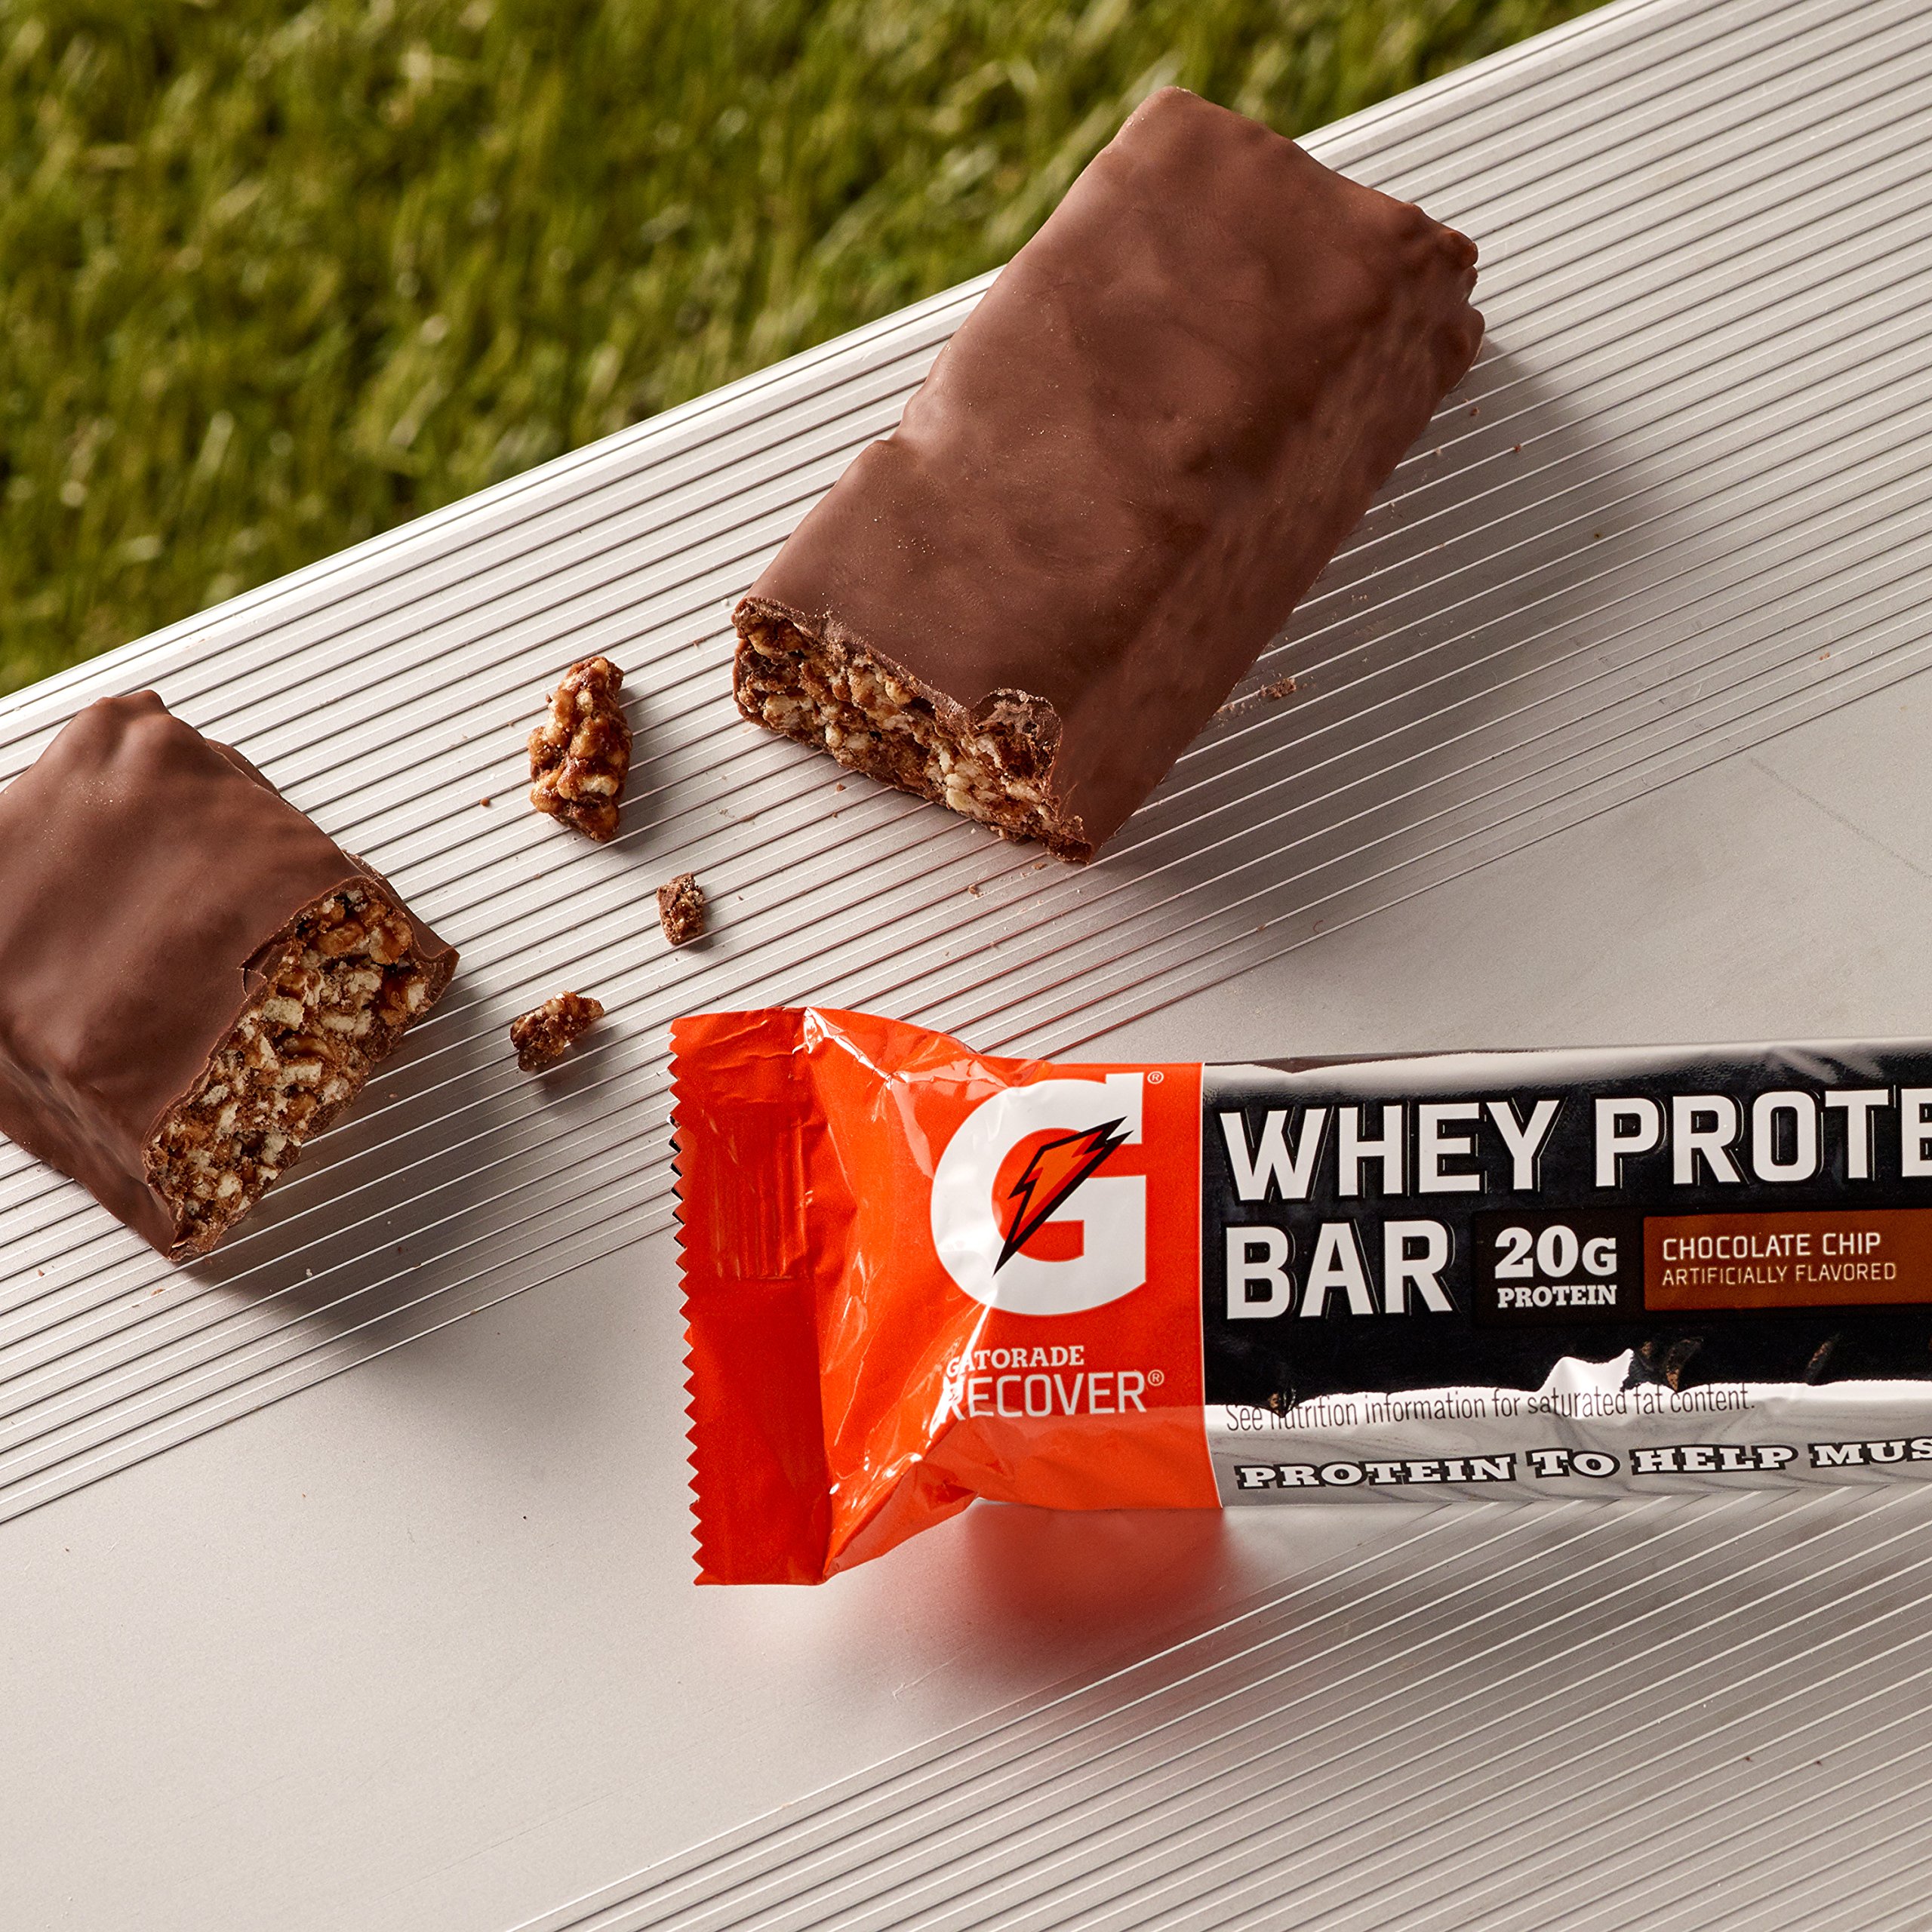 Gatorade Whey Protein Bars, Variety Pack, 2.8 oz bars (Pack of 18) & Whey Protein Recover Bars, S'mores, 2.8 ounce bars (12 Pack)